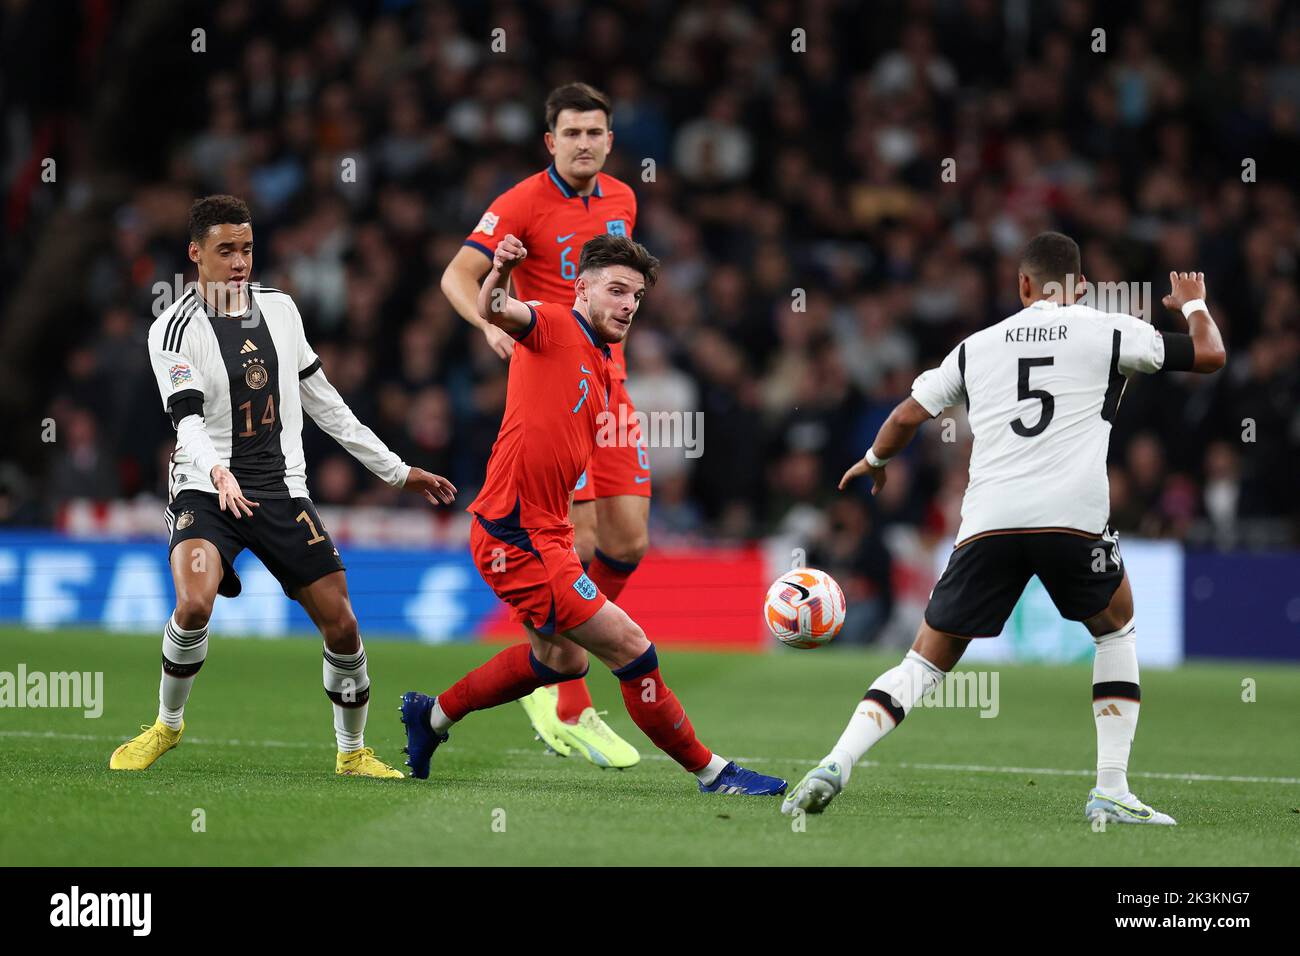 London, UK. 26th Sep, 2022. Declan Rice of England in action. England v Germany, UEFA Nations league International group C match at Wembley Stadium in London on Monday 26th September 2022. Editorial use only. pic by Andrew Orchard/Andrew Orchard sports photography/Alamy Live News Credit: Andrew Orchard sports photography/Alamy Live News Stock Photo